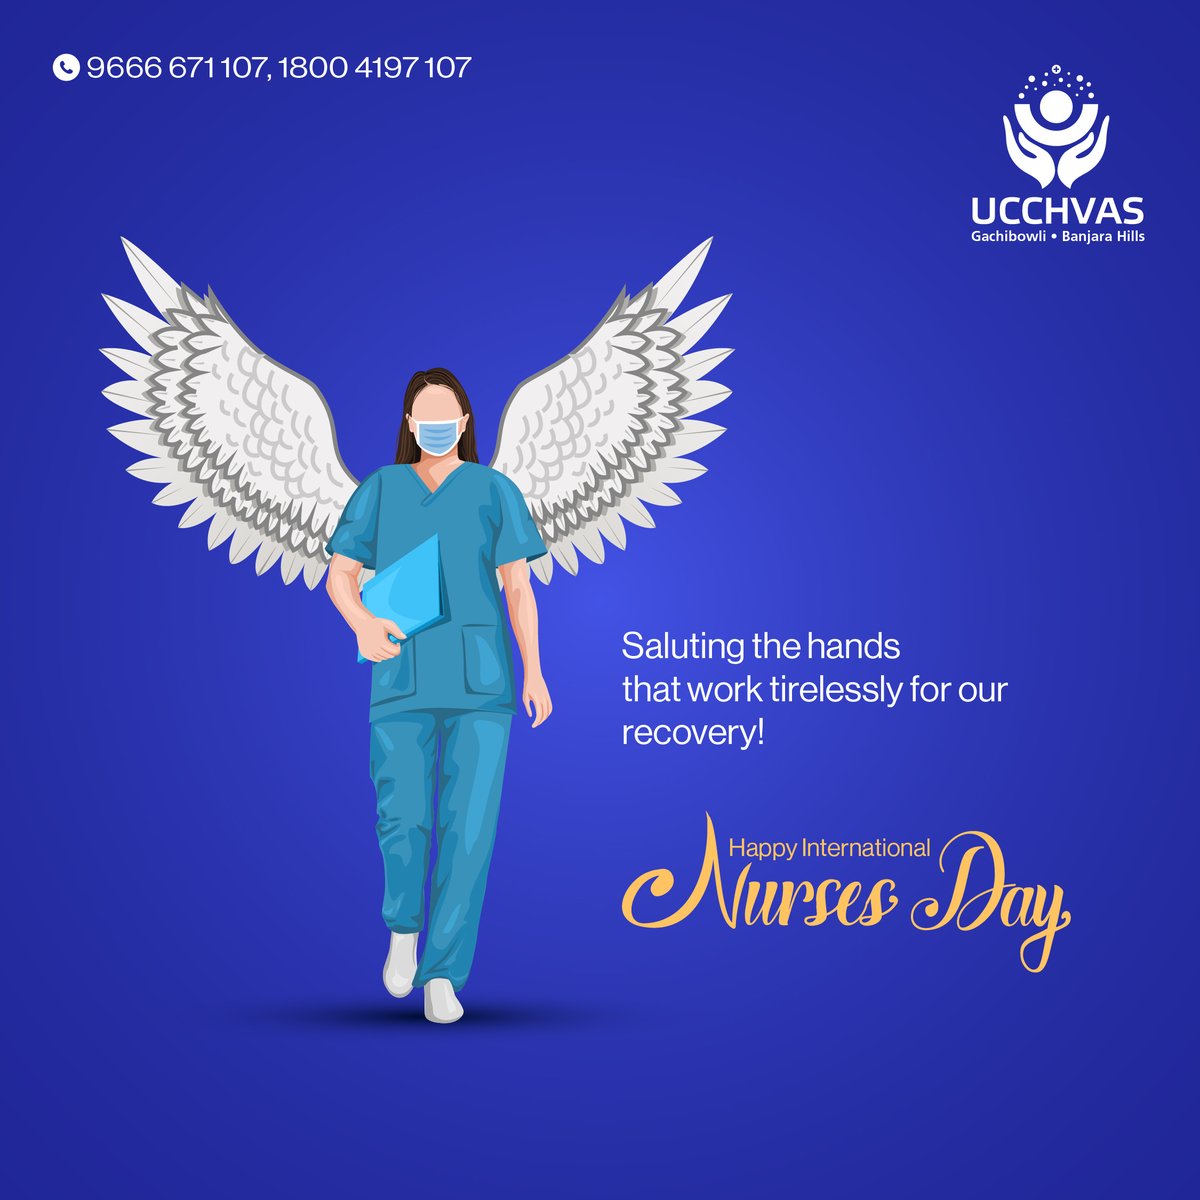 If you’ve ever come across a Nurse or a caregiver who has significantly impacted your life or recovery process, give them a shout out below!
We’re listening.

#InternationalNurseDay #Uchhvas #TransitionalCare #Rehabilitation #Therapy #Patients #Physio #Physiotherapist #Hyderabad